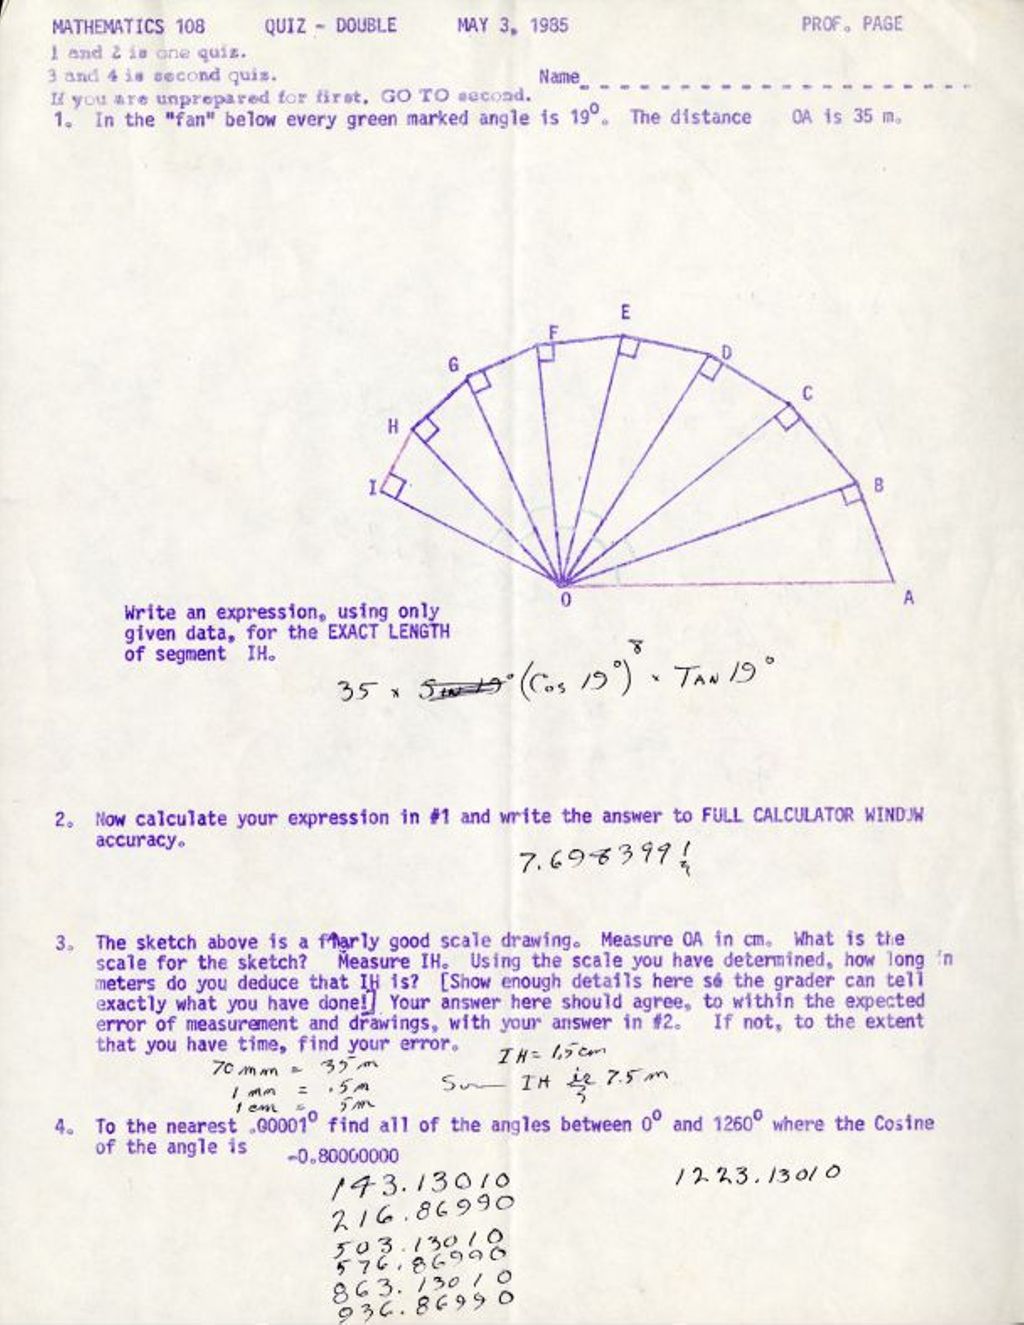 Miniature of Math 108 Quiz Double (1985) In the “fan” below ever green marked angles is 19 degrees. The distance of OA is 35 m w/ DP notes